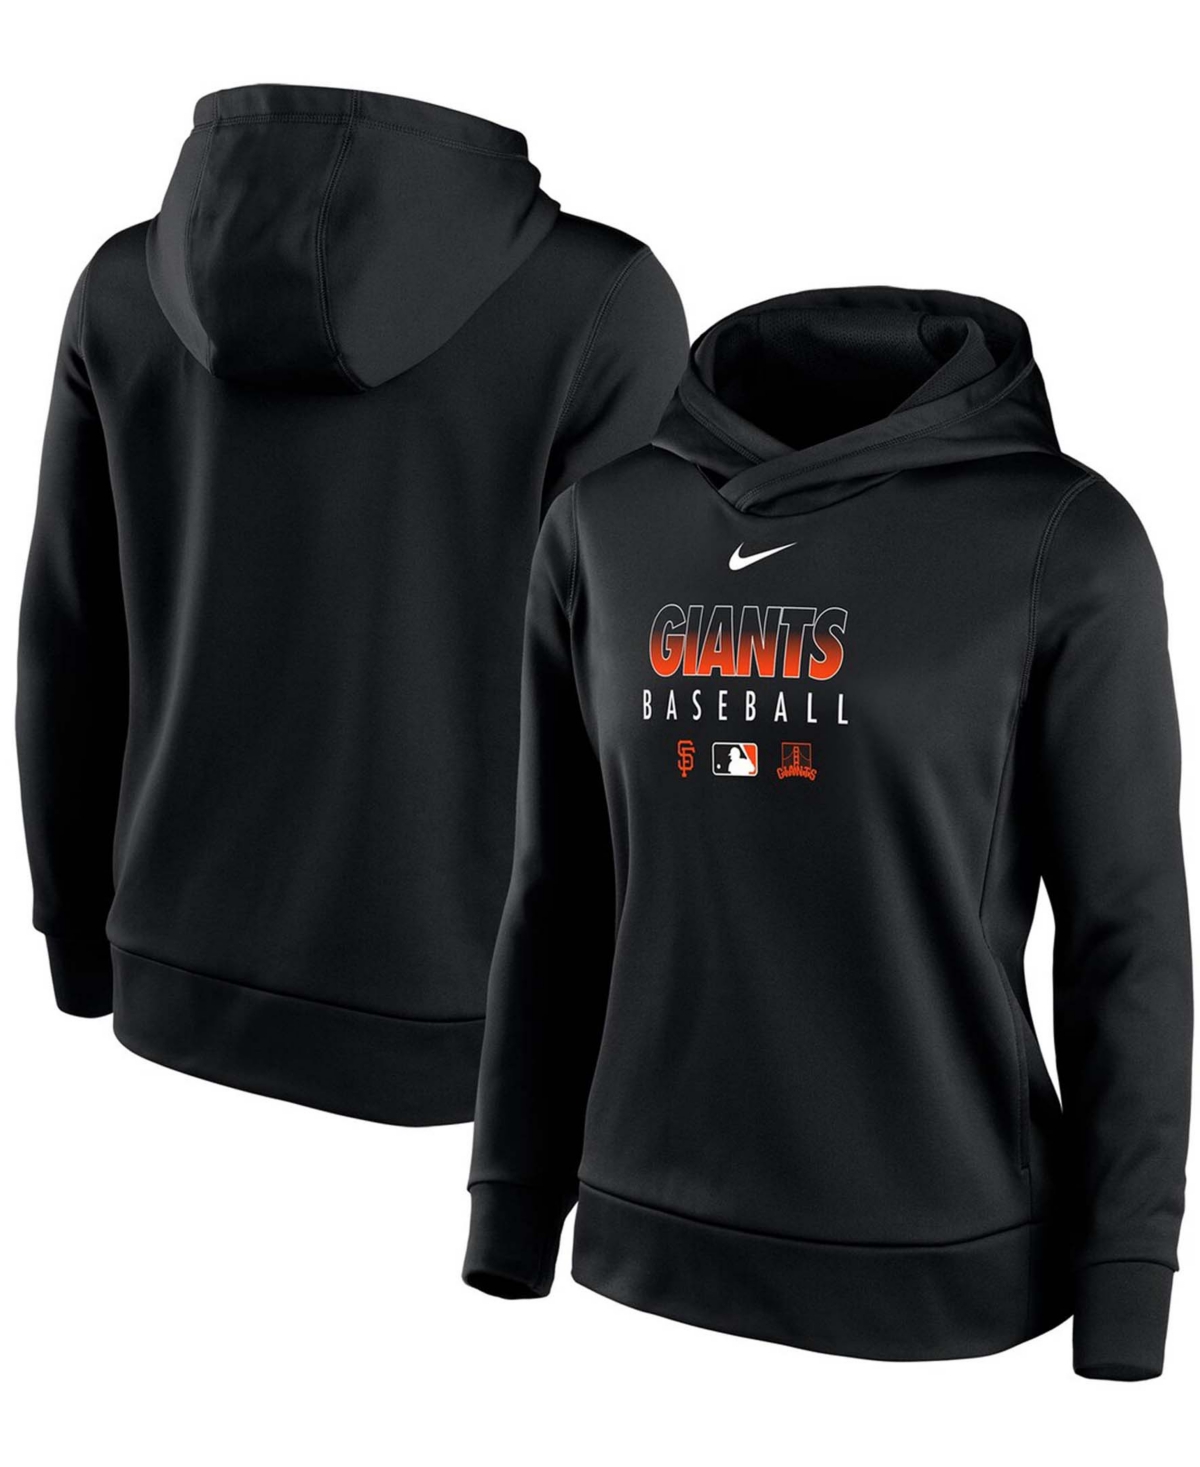 Women's Black San Francisco Giants Authentic Collection Performance Pullover Hoodie